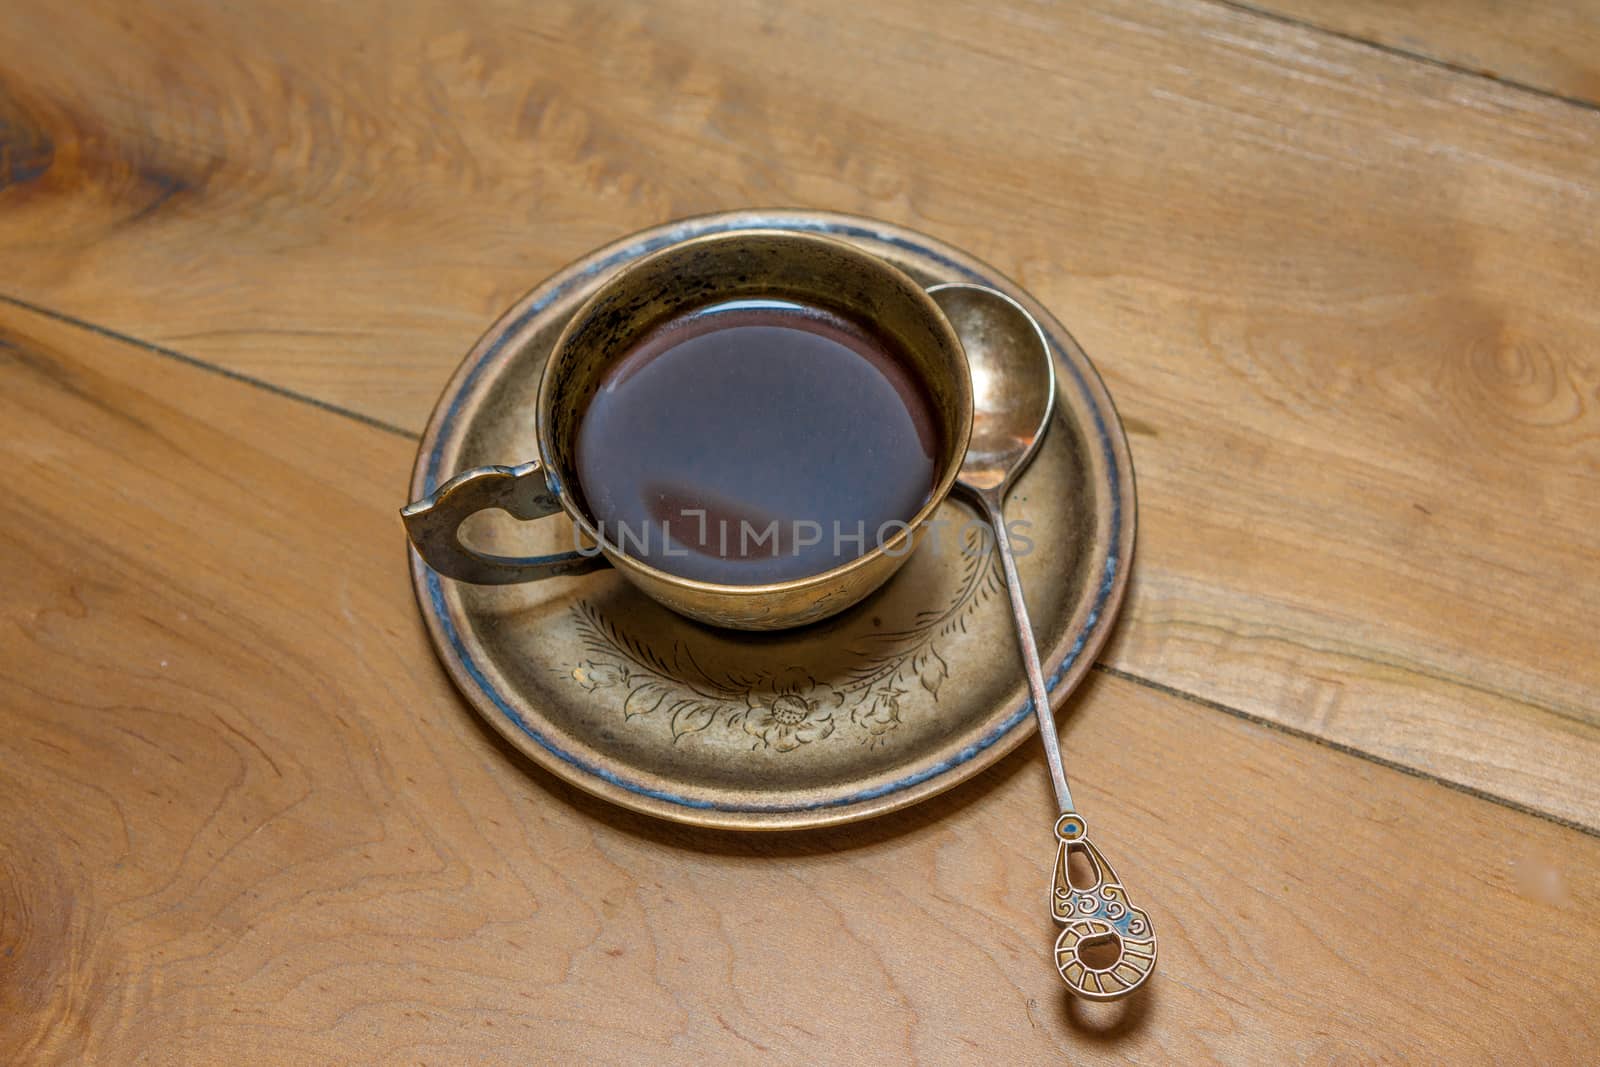 A cup with black coffee, a saucer and a spoon made of bronze stand on an oak table